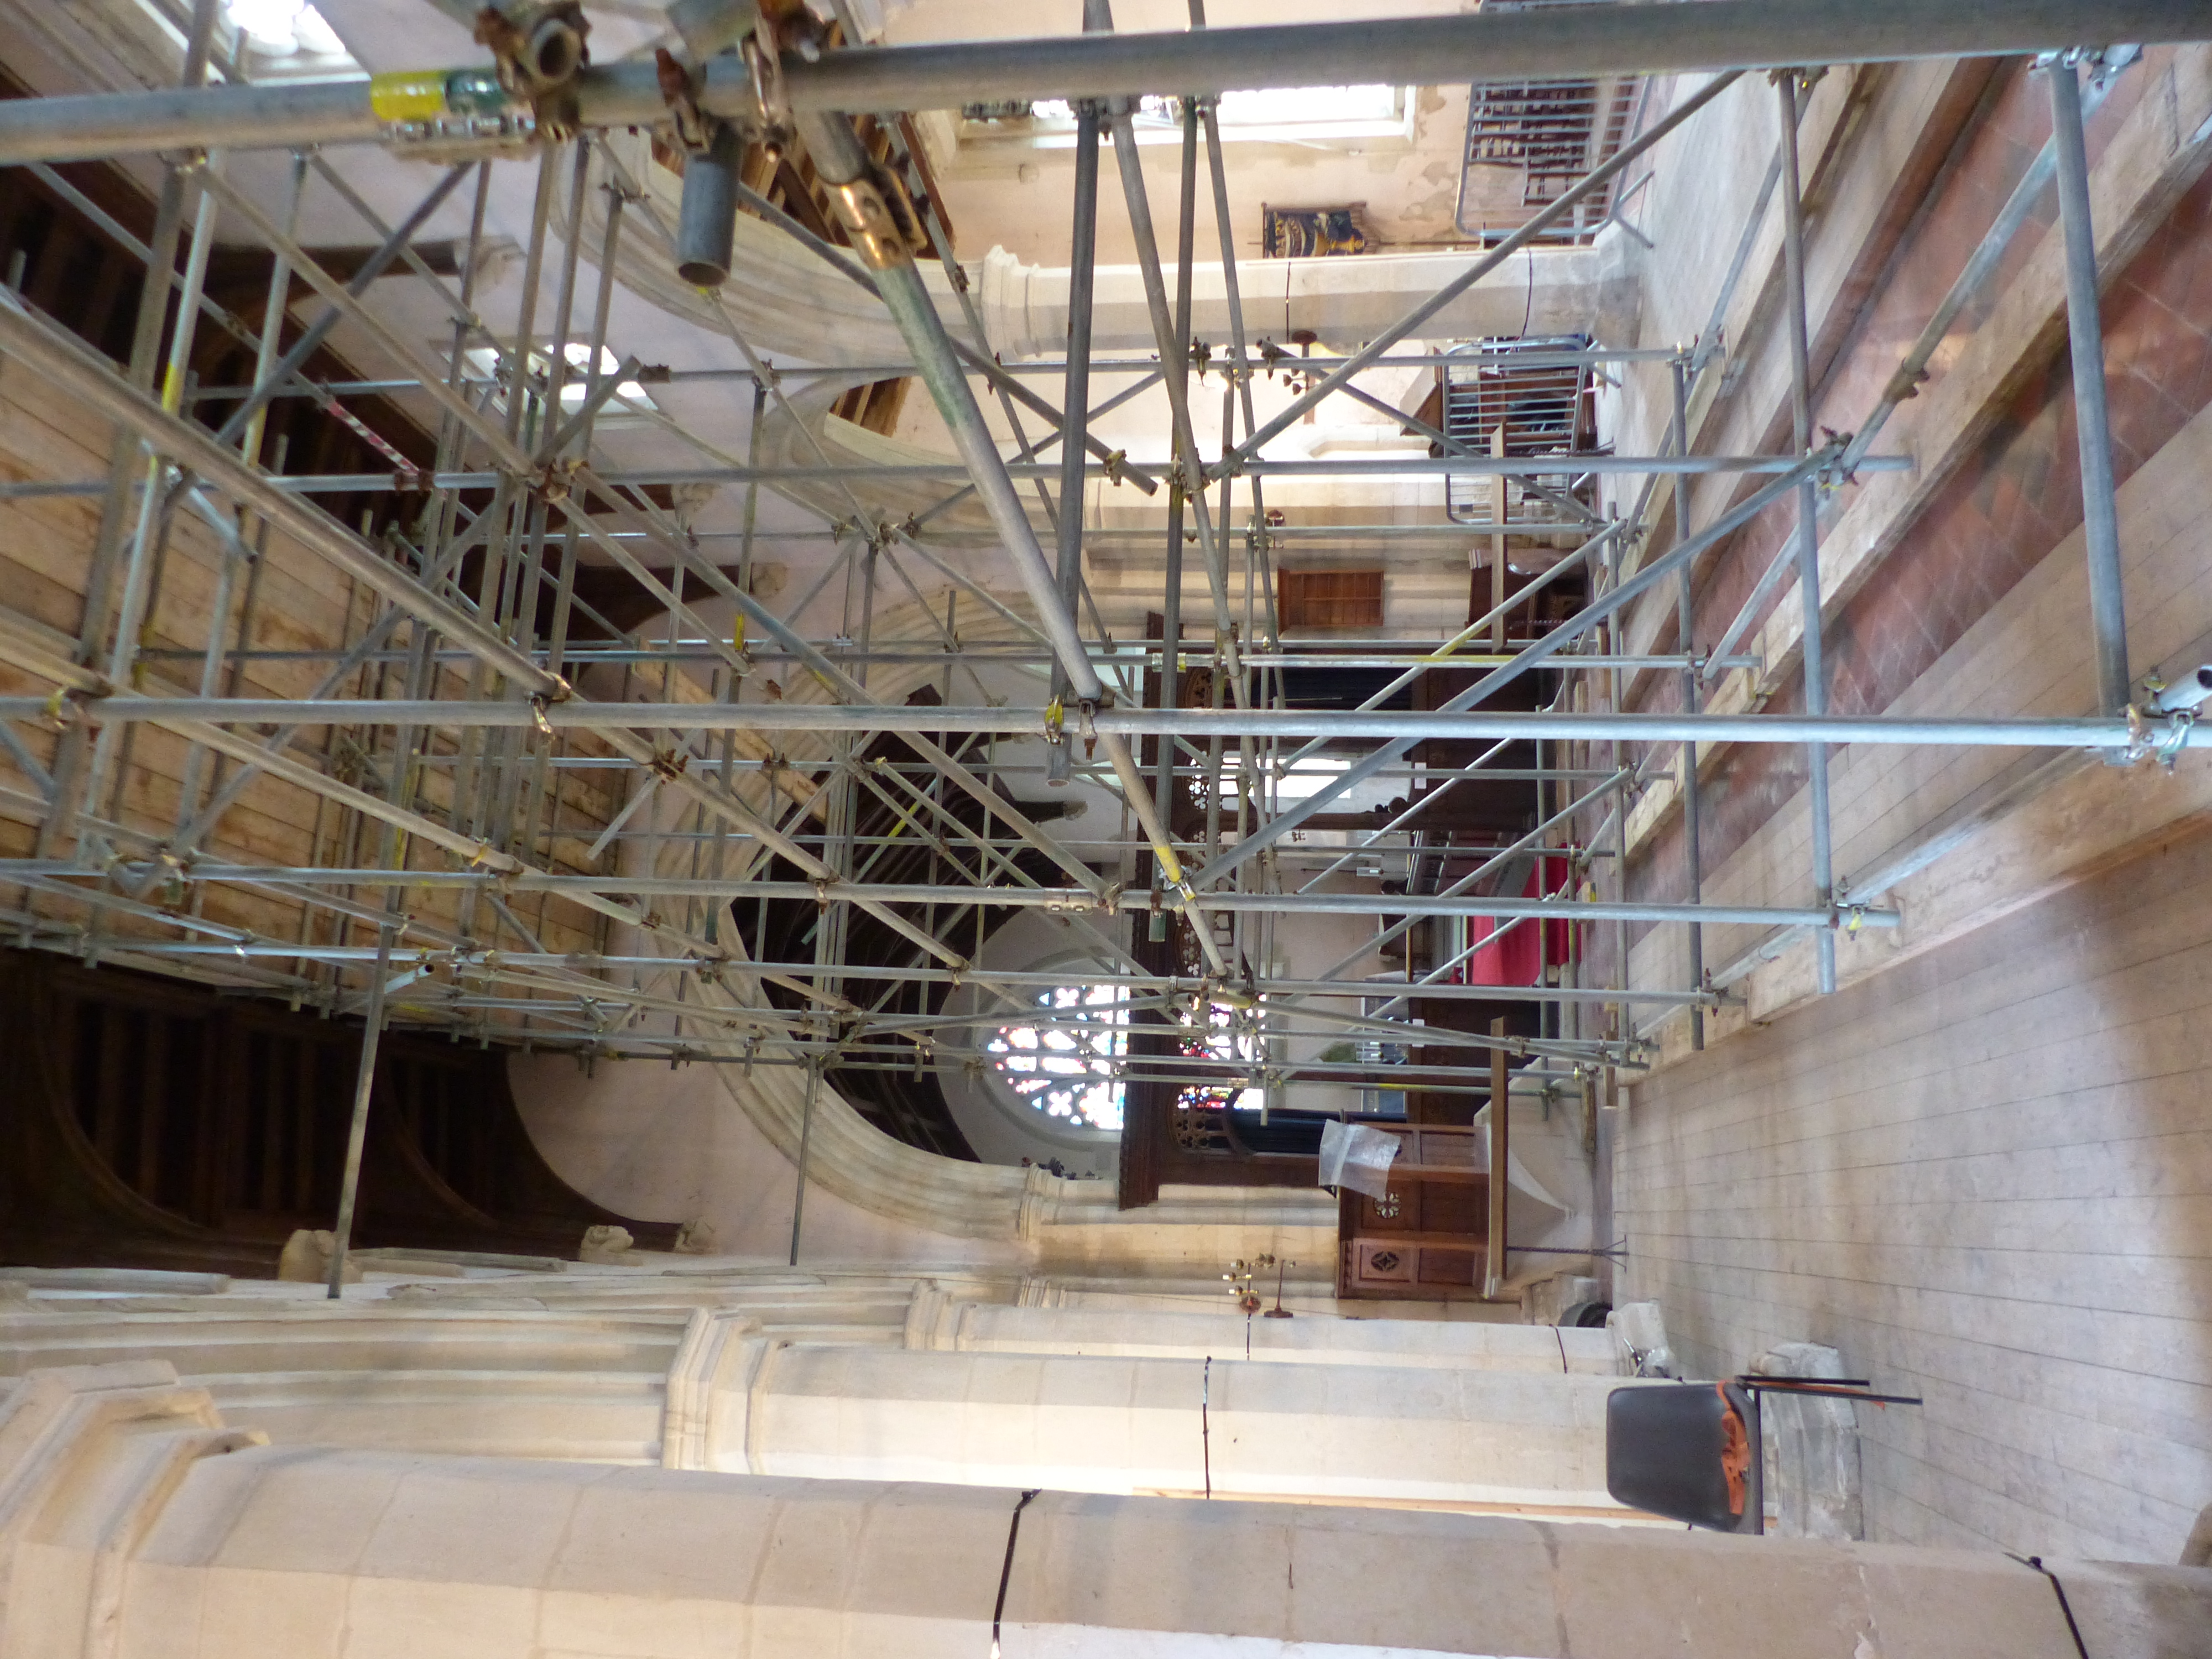 Crash Deck Scaffold in the Nave